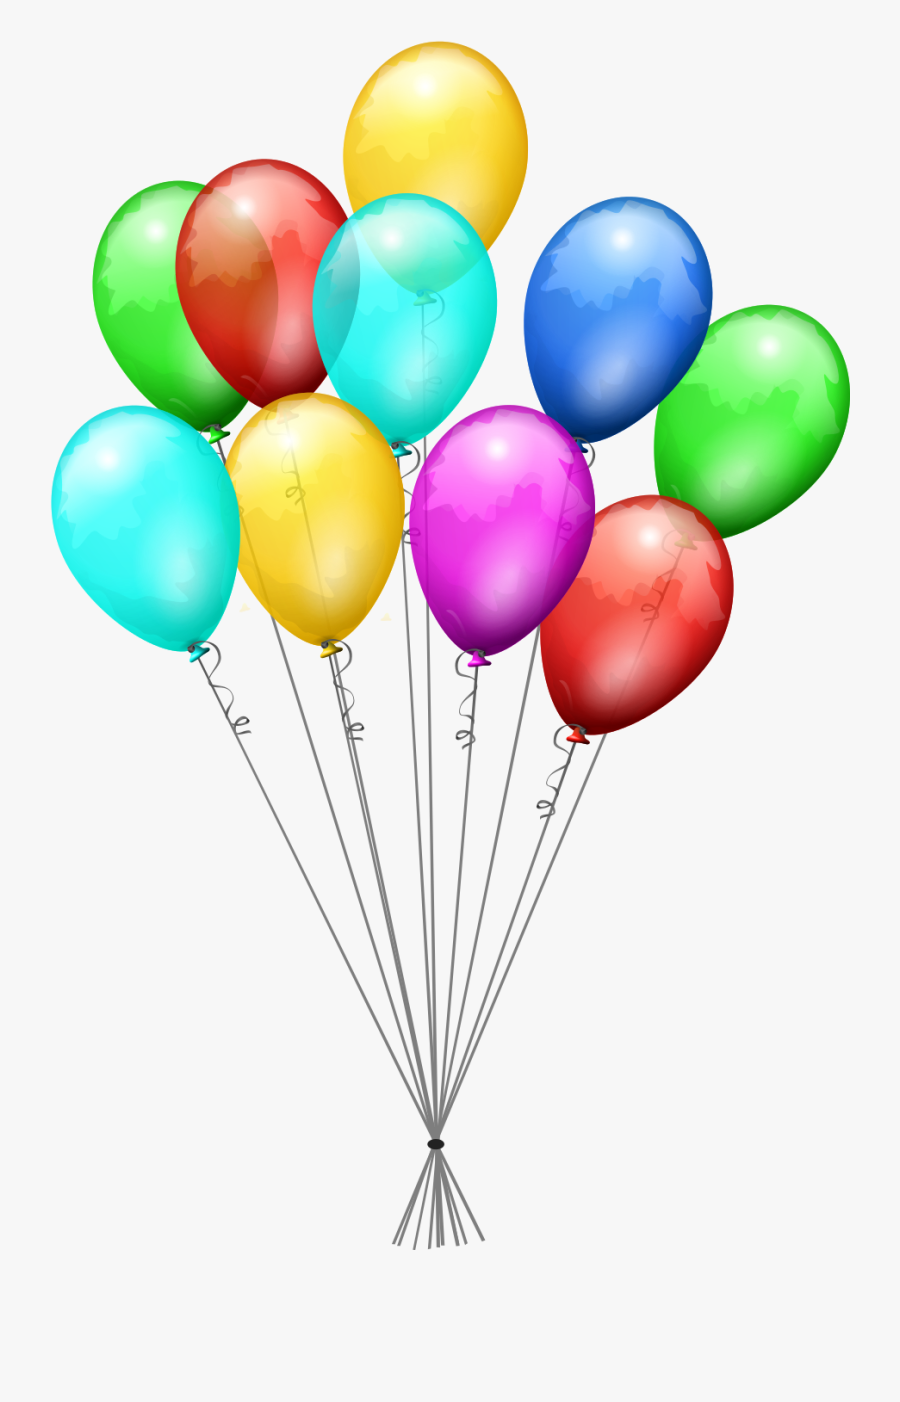 Balloons On A String Png, Transparent Clipart